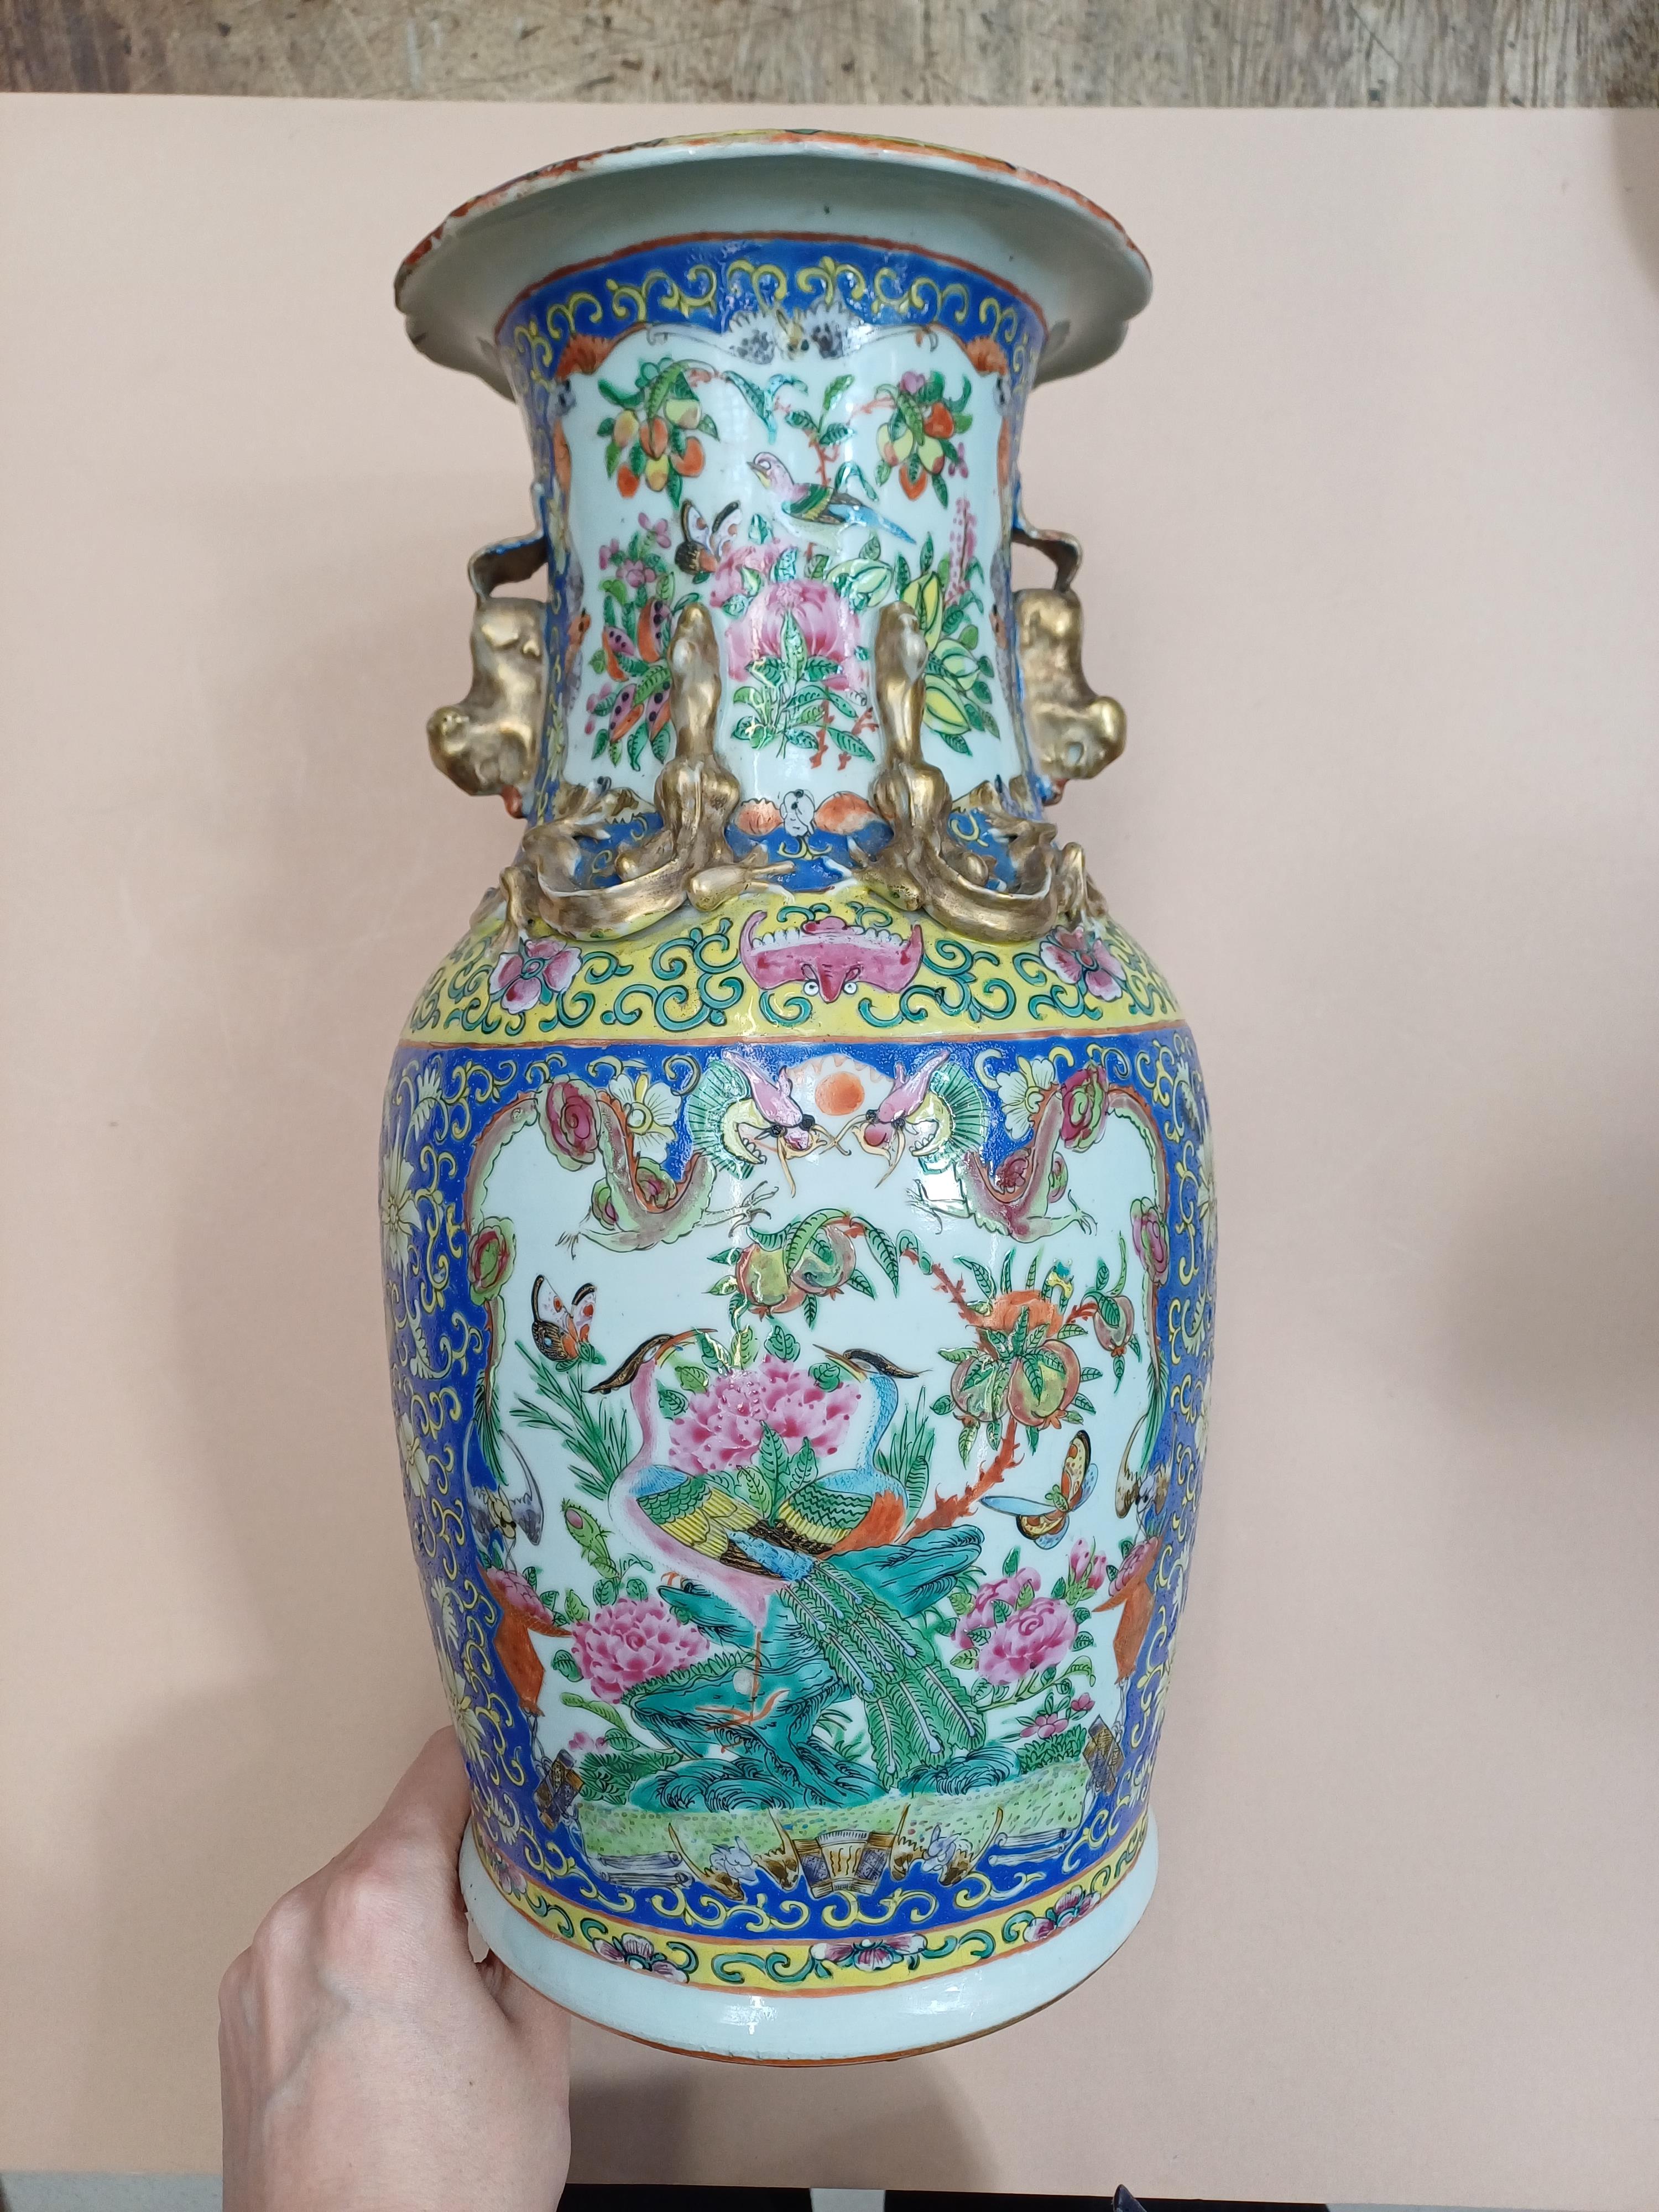 A PAIR OF CHINESE CANTON FAMILLE-ROSE VASES 十九或二十世紀 廣彩花鳥圖紋瓶一對 - Image 9 of 14